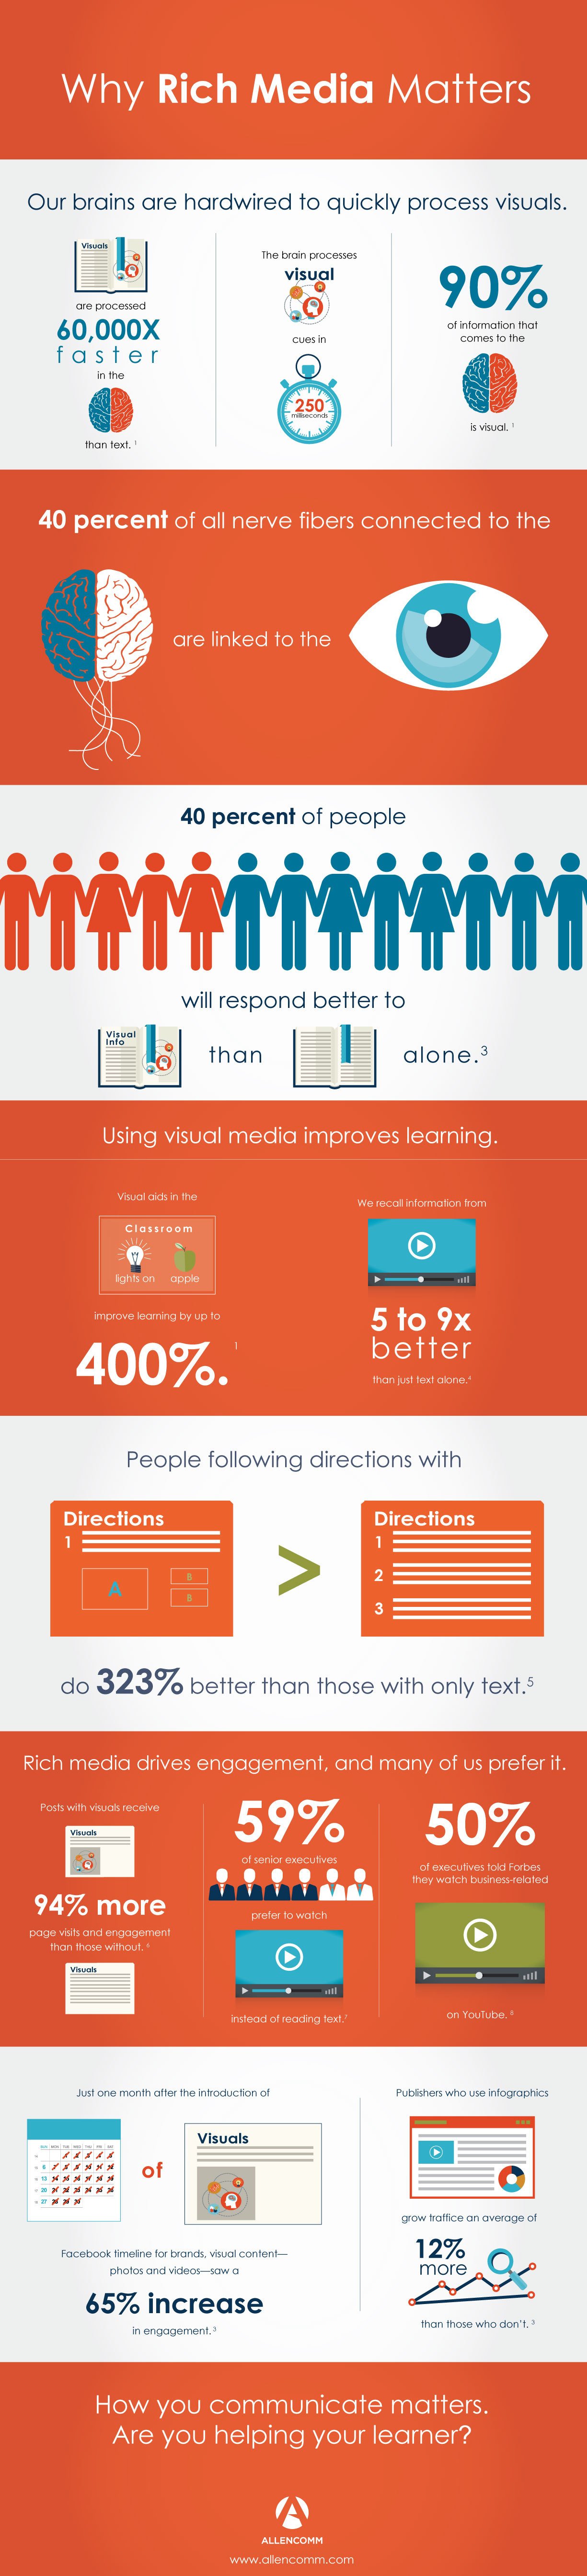 Boosting Learner Engagement with Rich Media Infographic